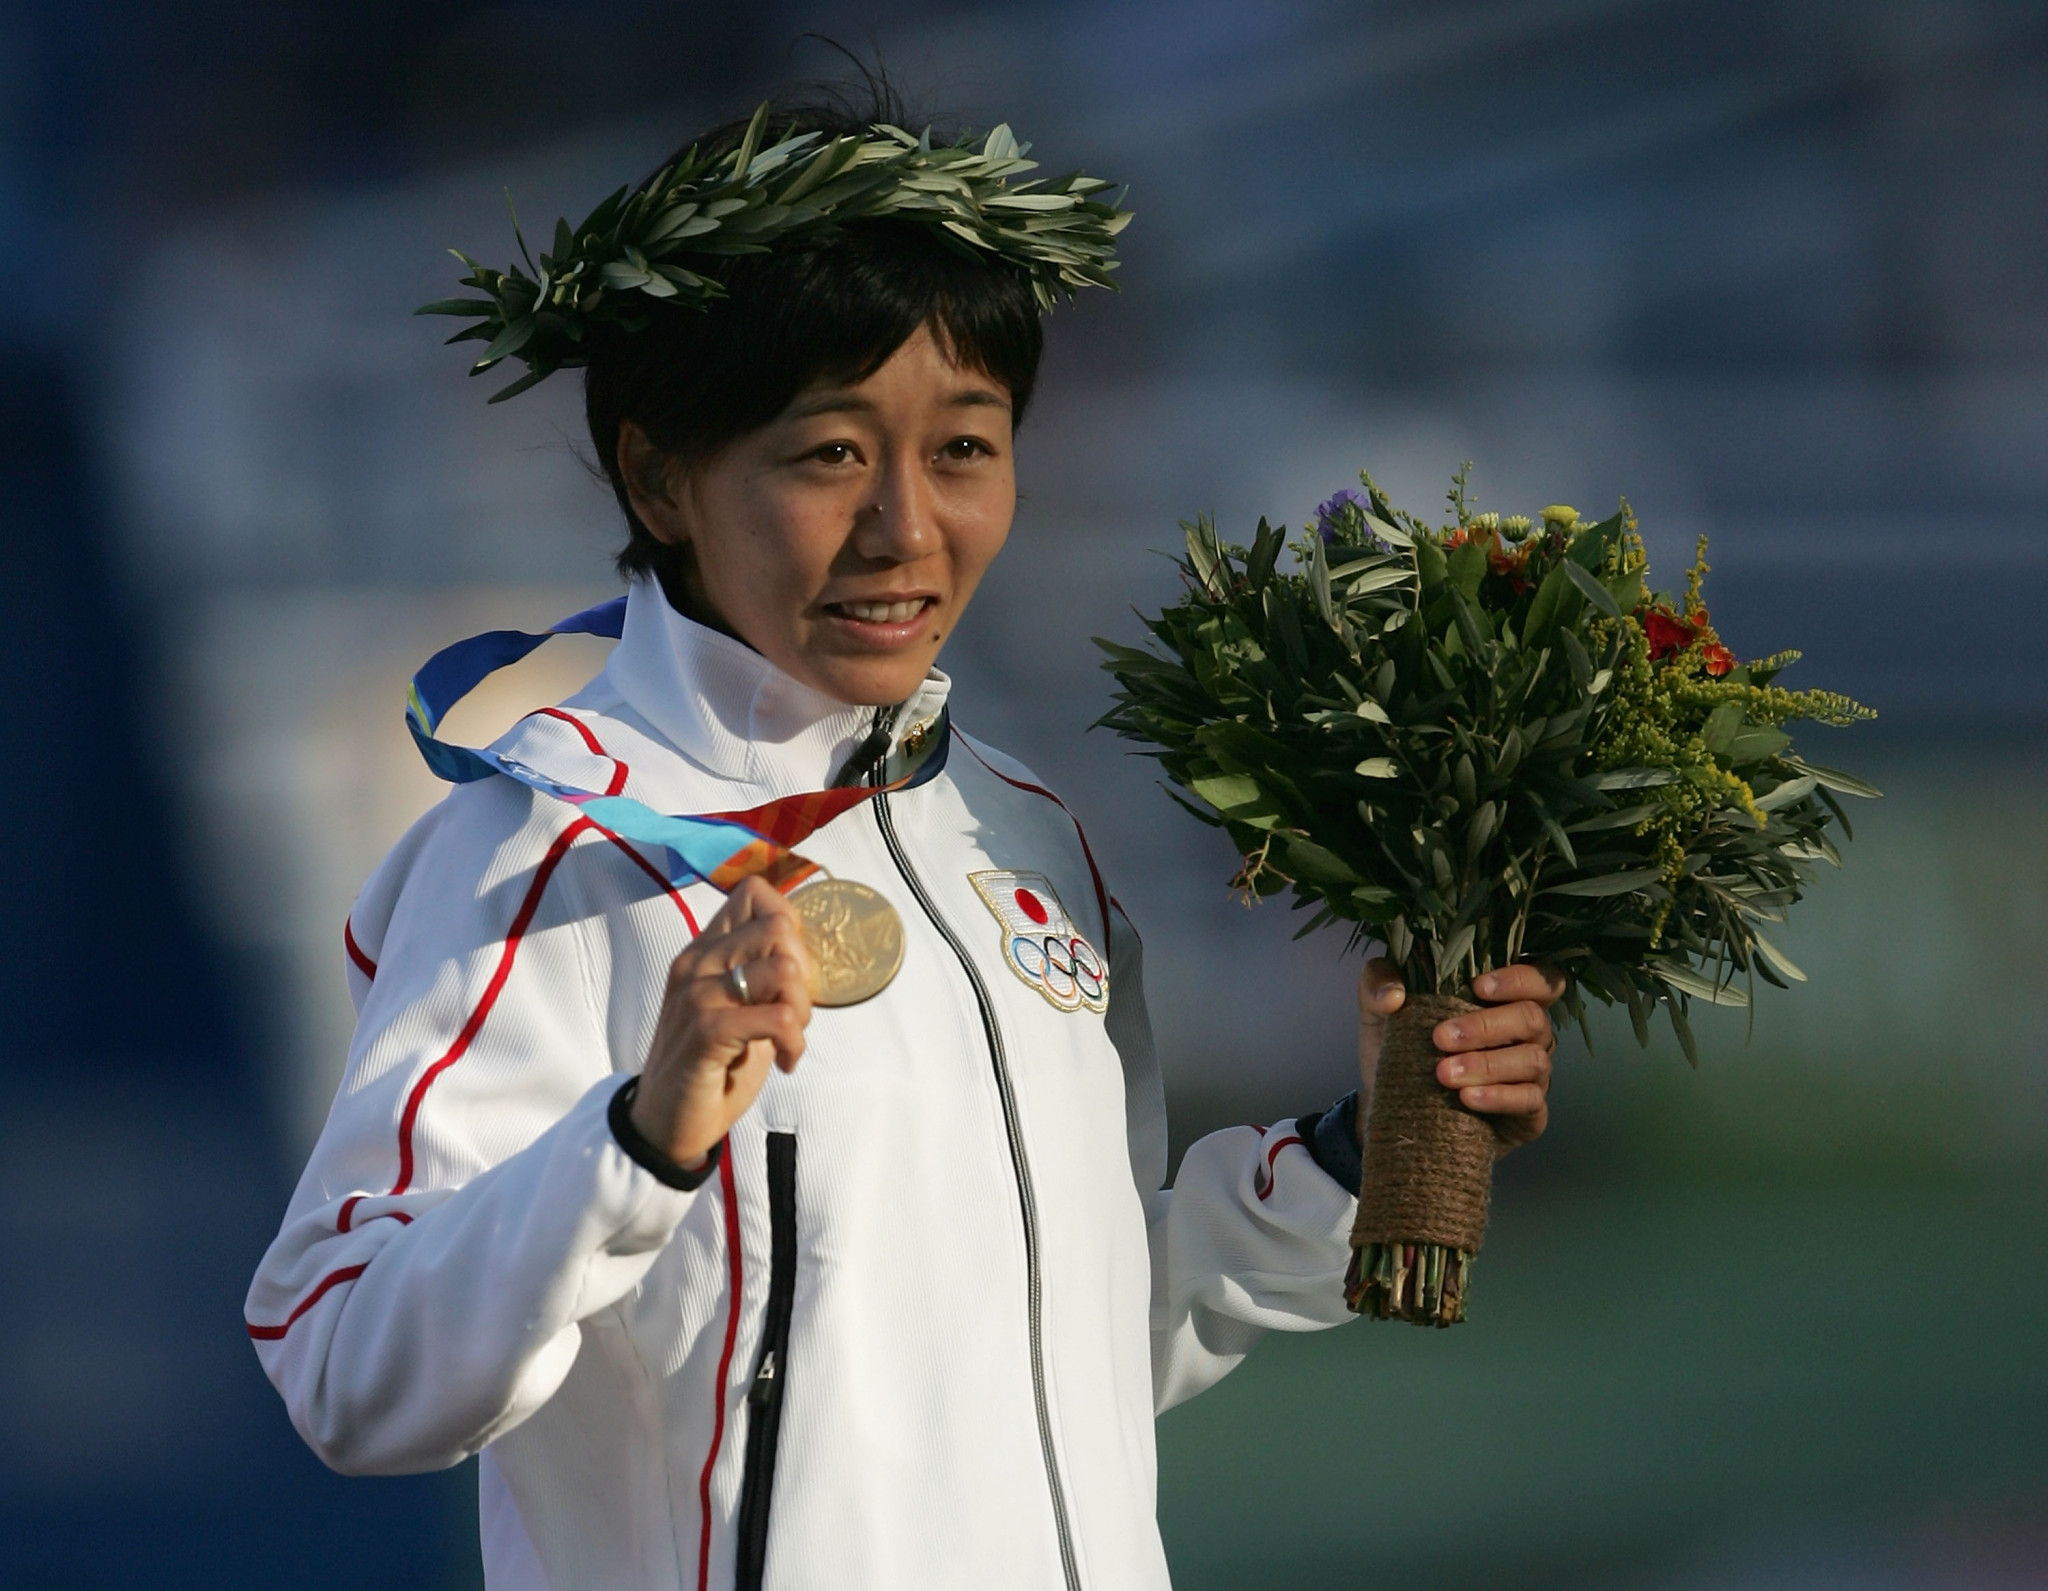 Mizuki Noguchi will feature in the first exchange of the Olympic Torch Relay ©Getty Images